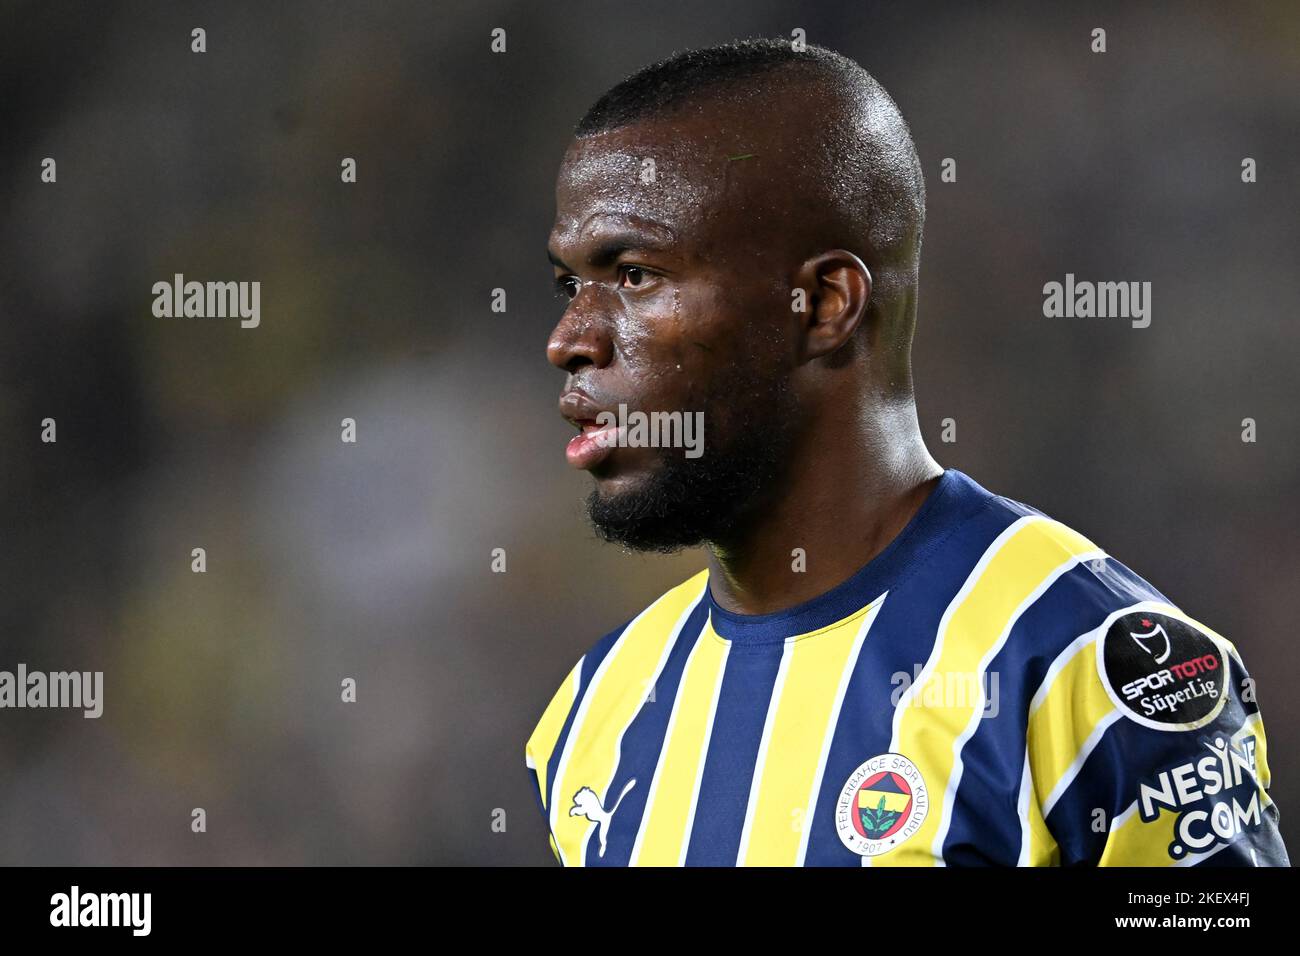 ISTANBUL - Enner Valencia of Fenerbahce SK during the Turkish Super Lig match between Fenerbahce AS and Demir Grup Sivasspor at Ulker stadium on November 7, 2022 in Istanbul, Turkey. ANP | Dutch Height | GERRIT FROM COLOGNE Stock Photo